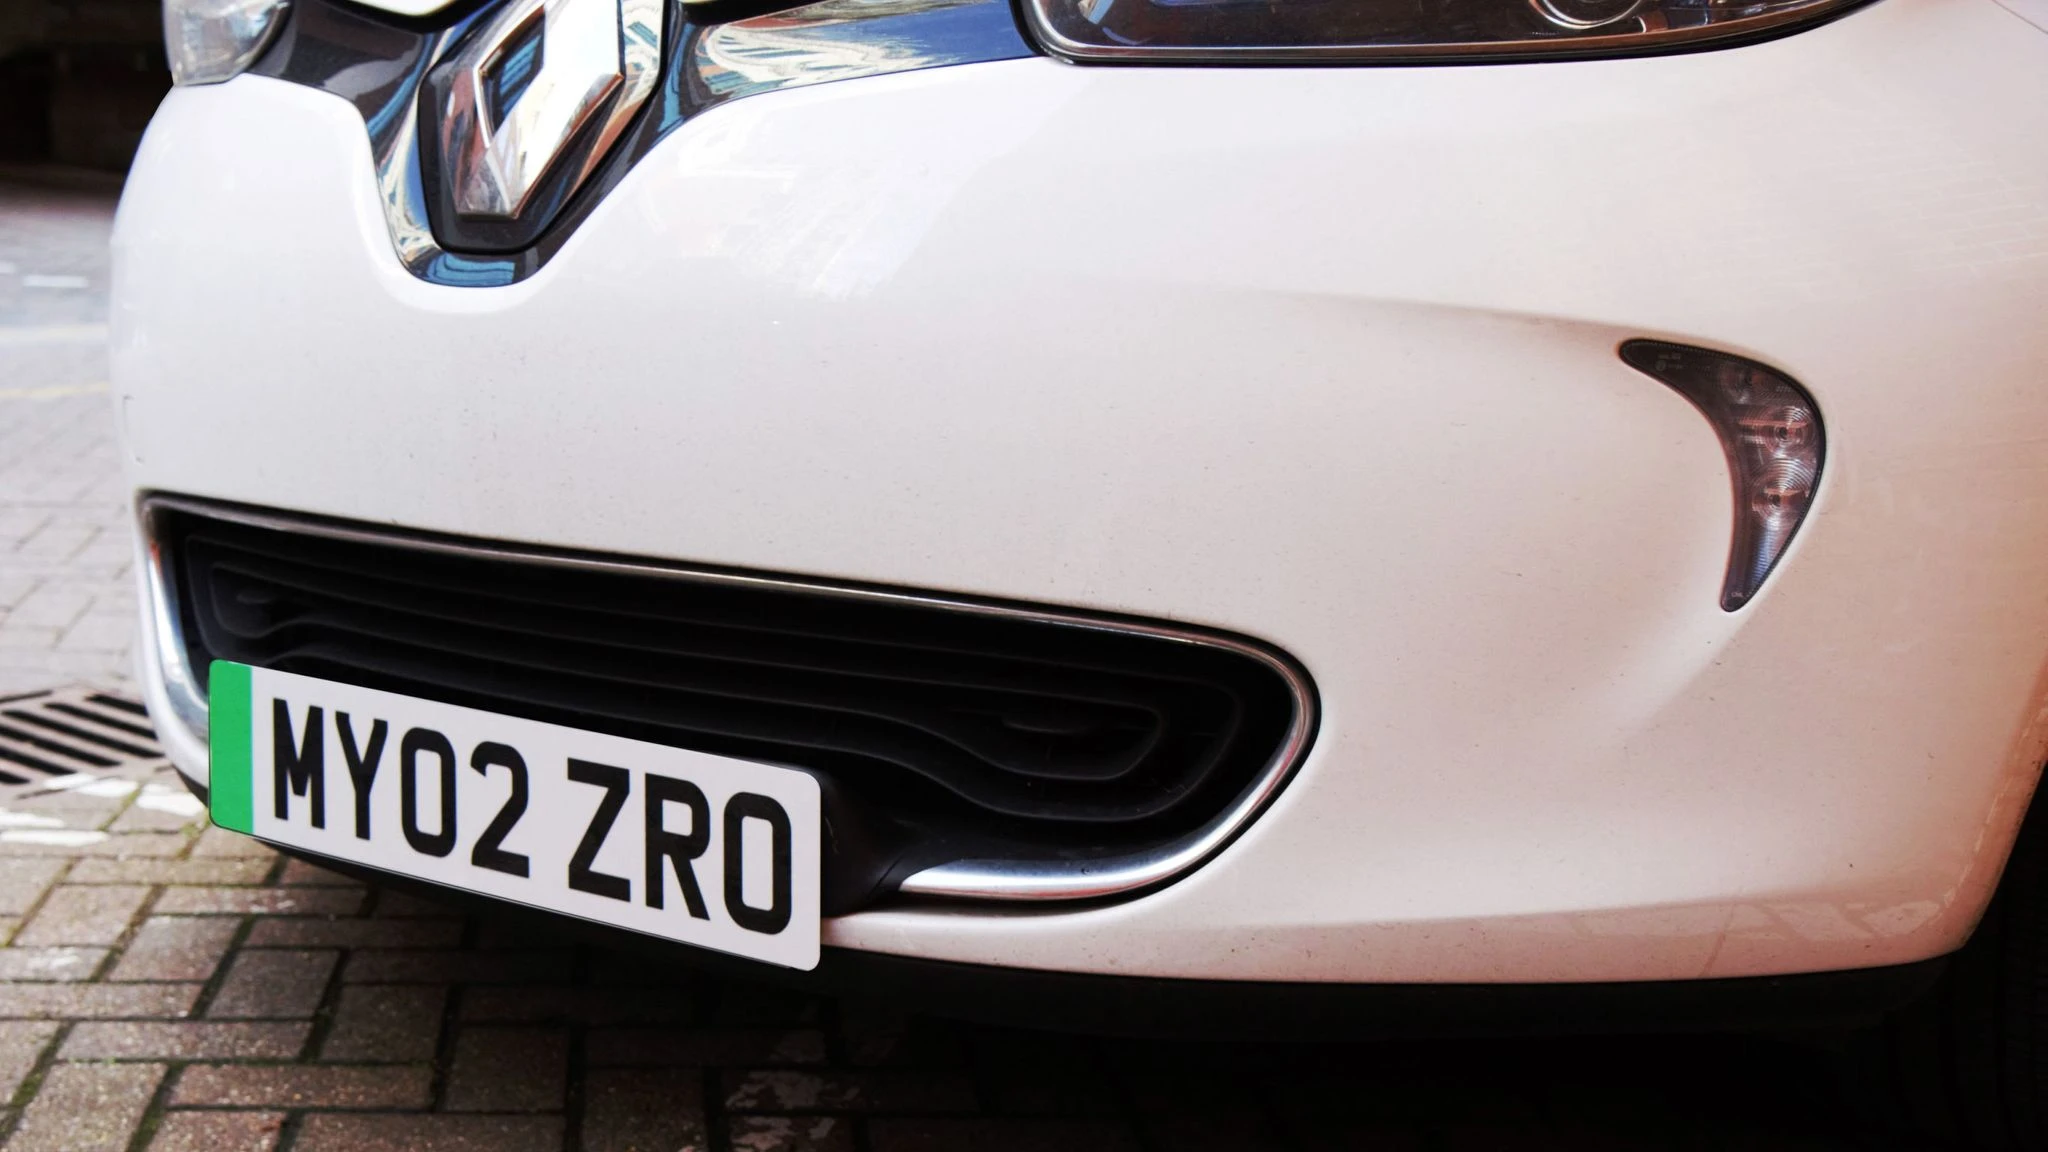 DVLA Allow A Green Flash On Number Plates Fitted To Electric Vehicles